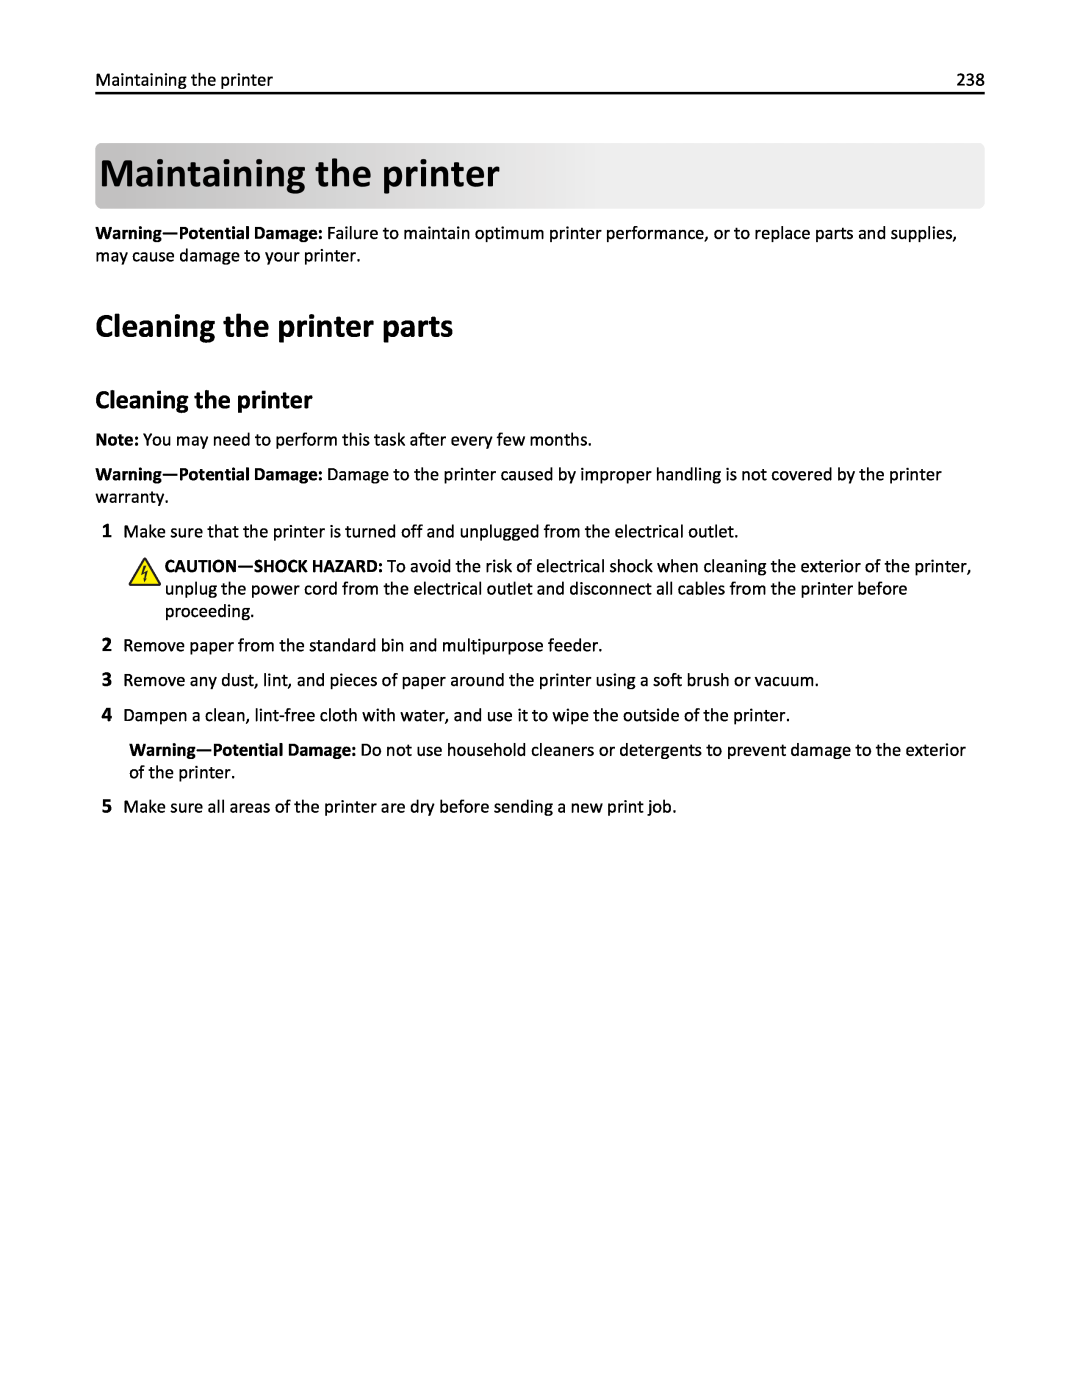 Lexmark 237, MX710DHE, 24T7310, 037 manual Maintaining theprinter, Cleaning the printer parts 